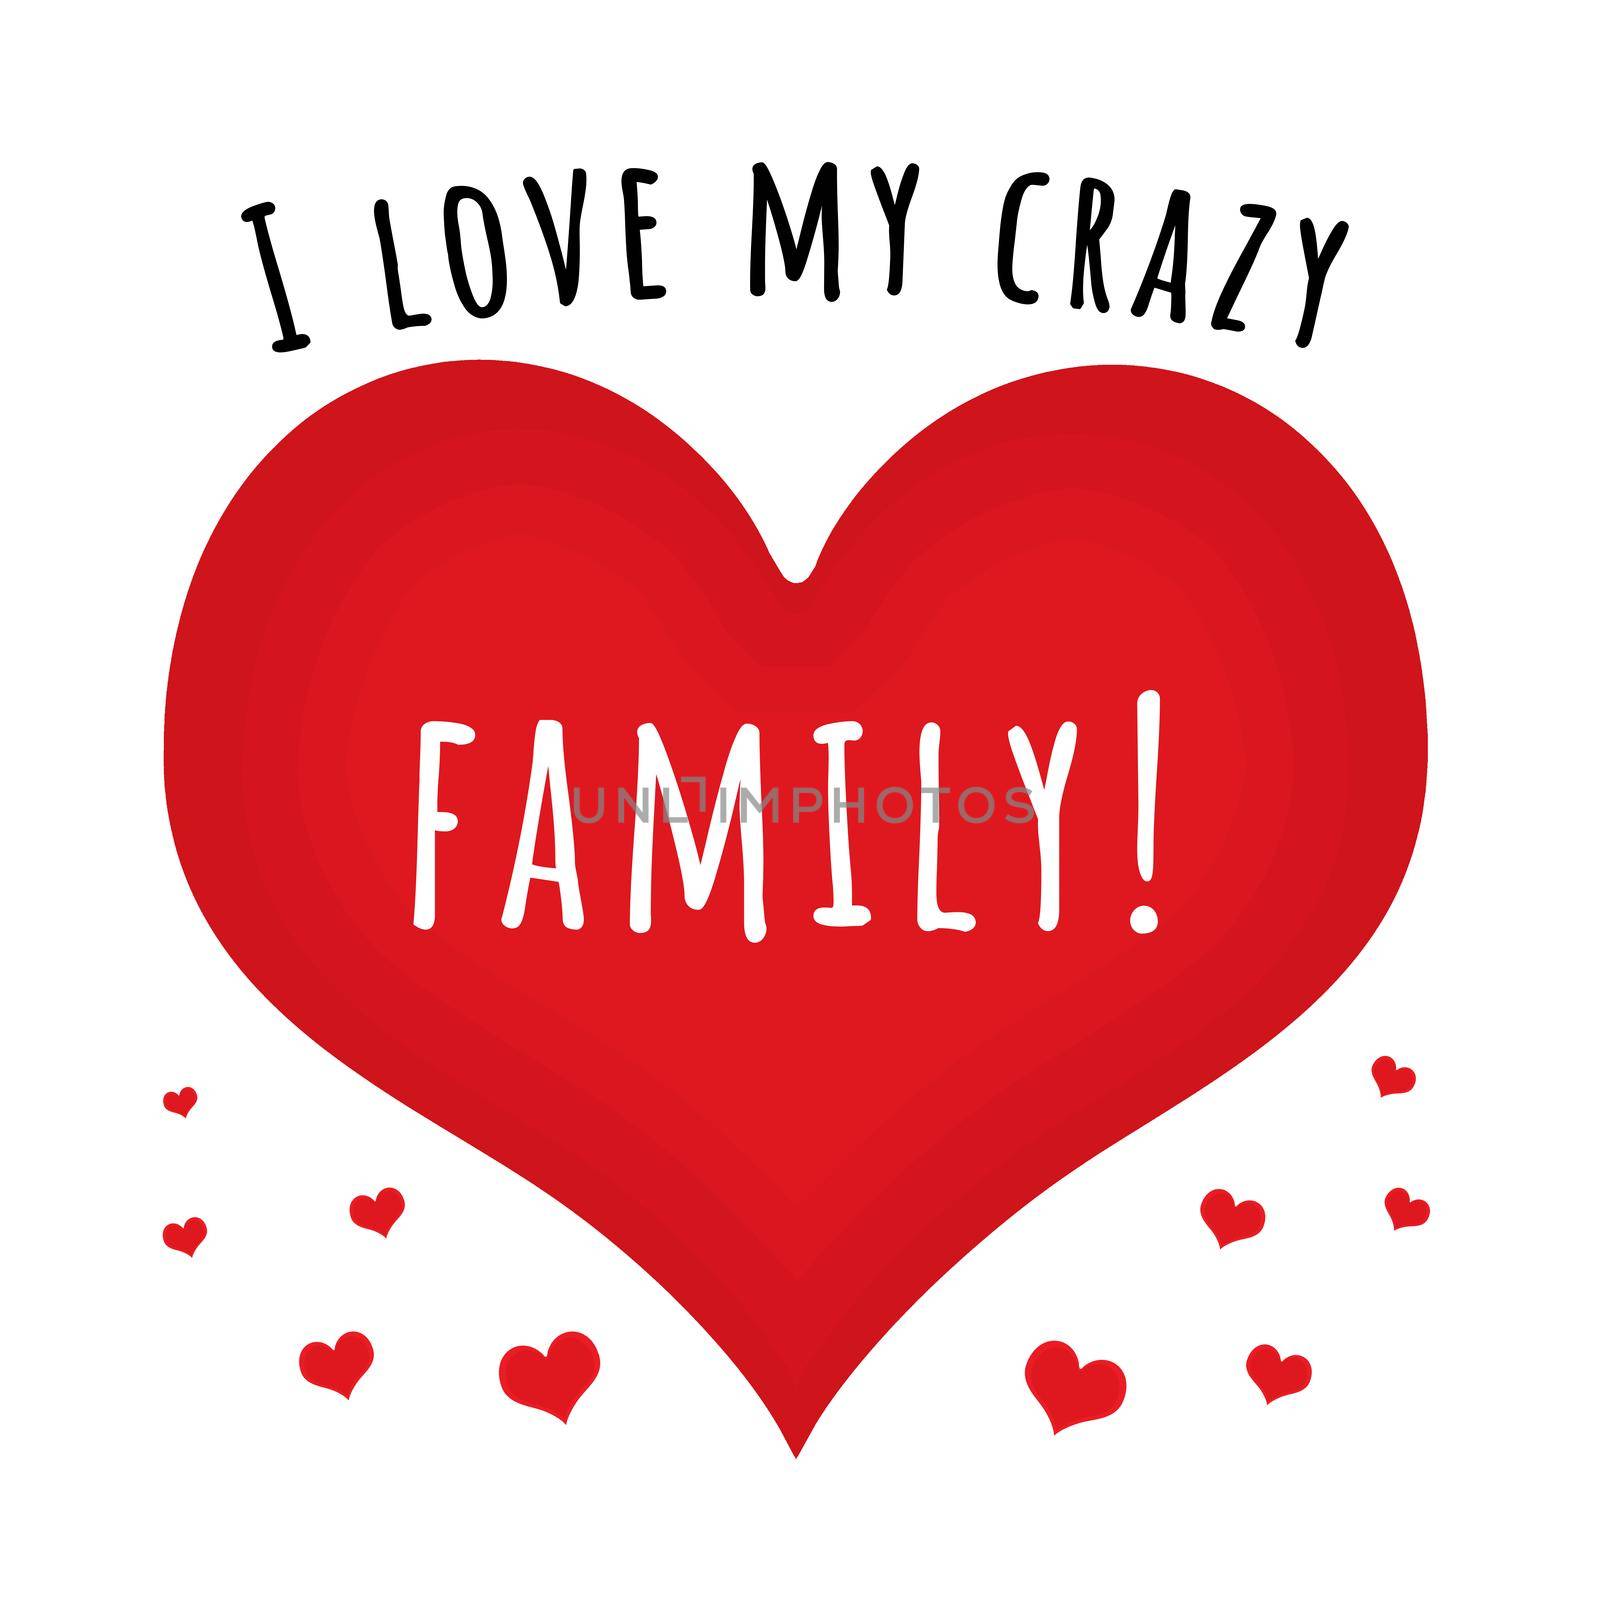 A big love heart with the text "I love my crazy family" with floating hearts.